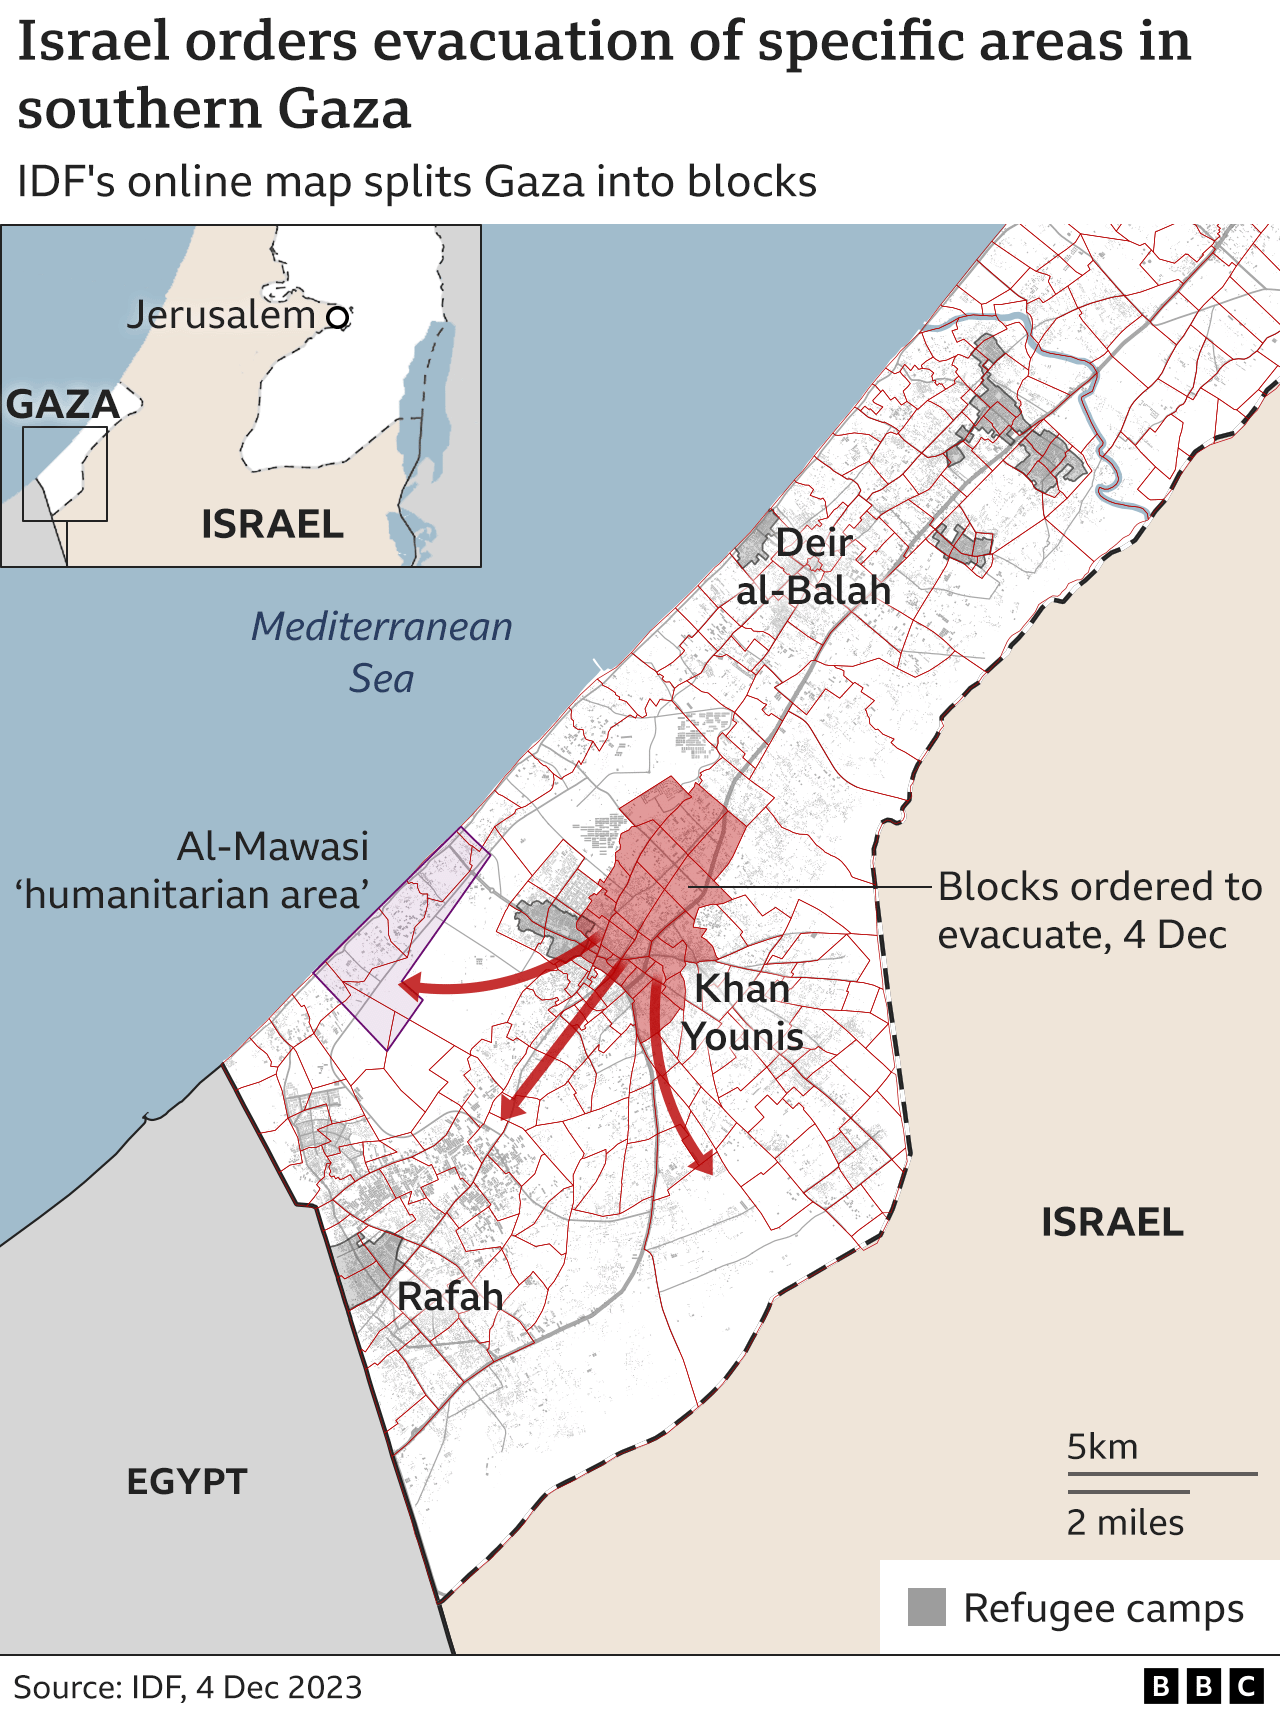 The map shows some of the areas that have been ordered to be evacuated by Israeli forces